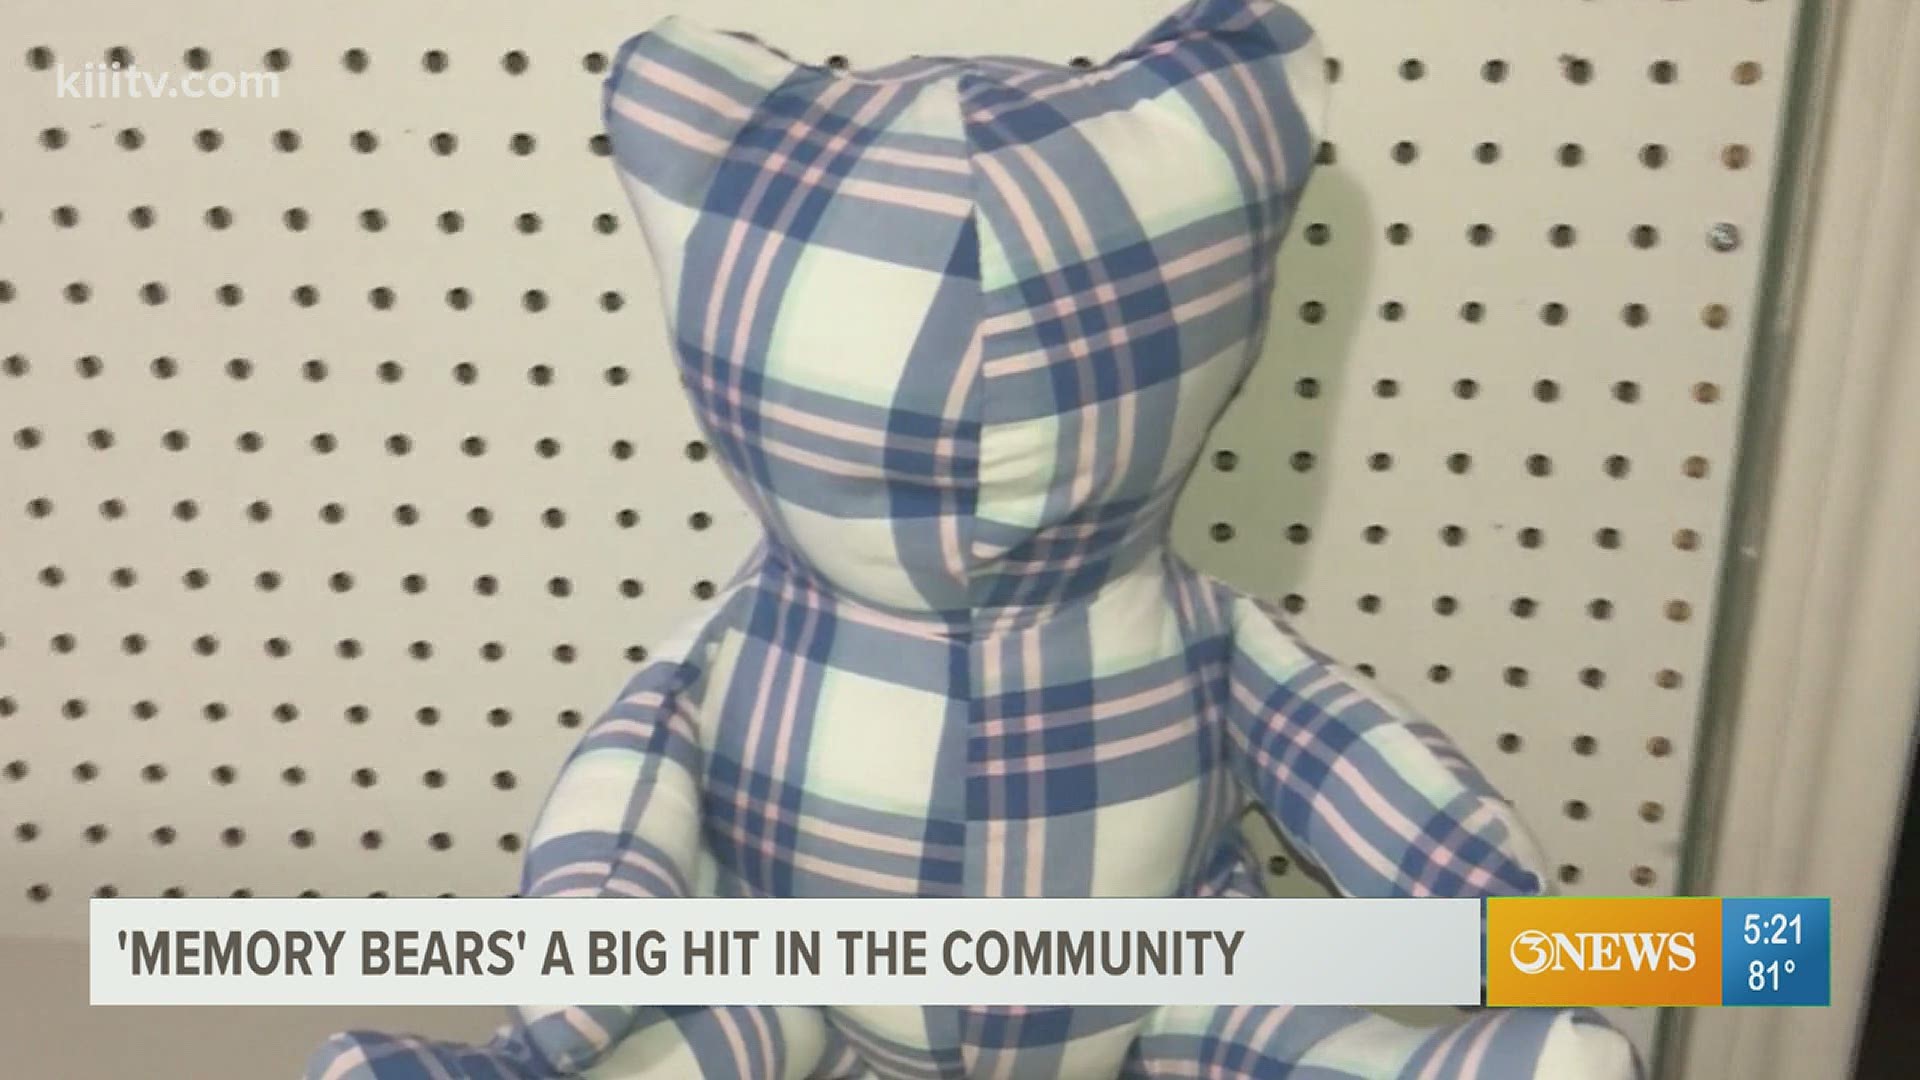 Calallen resident finds a way to refurbish clothing and create bears